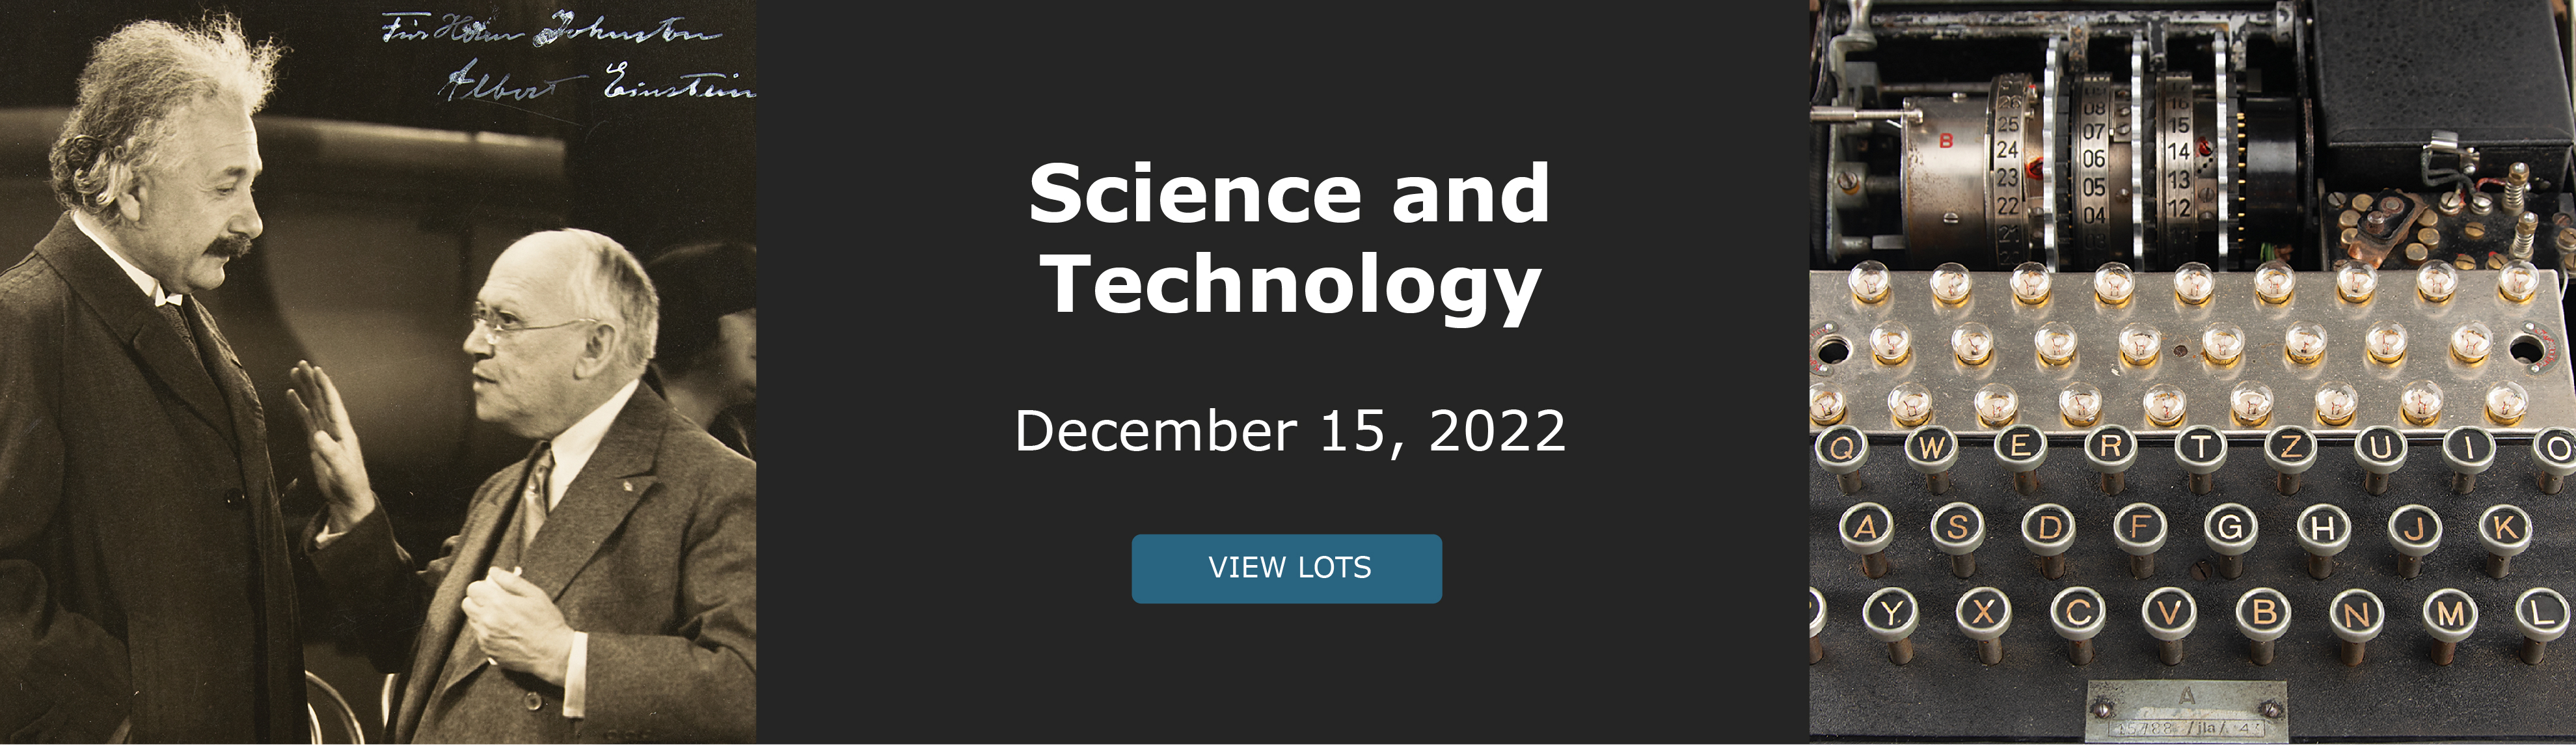 650 December Science and Tech Auction Featuring the Otto Berg Collection - Closes December 15, 2022. Bid Now!